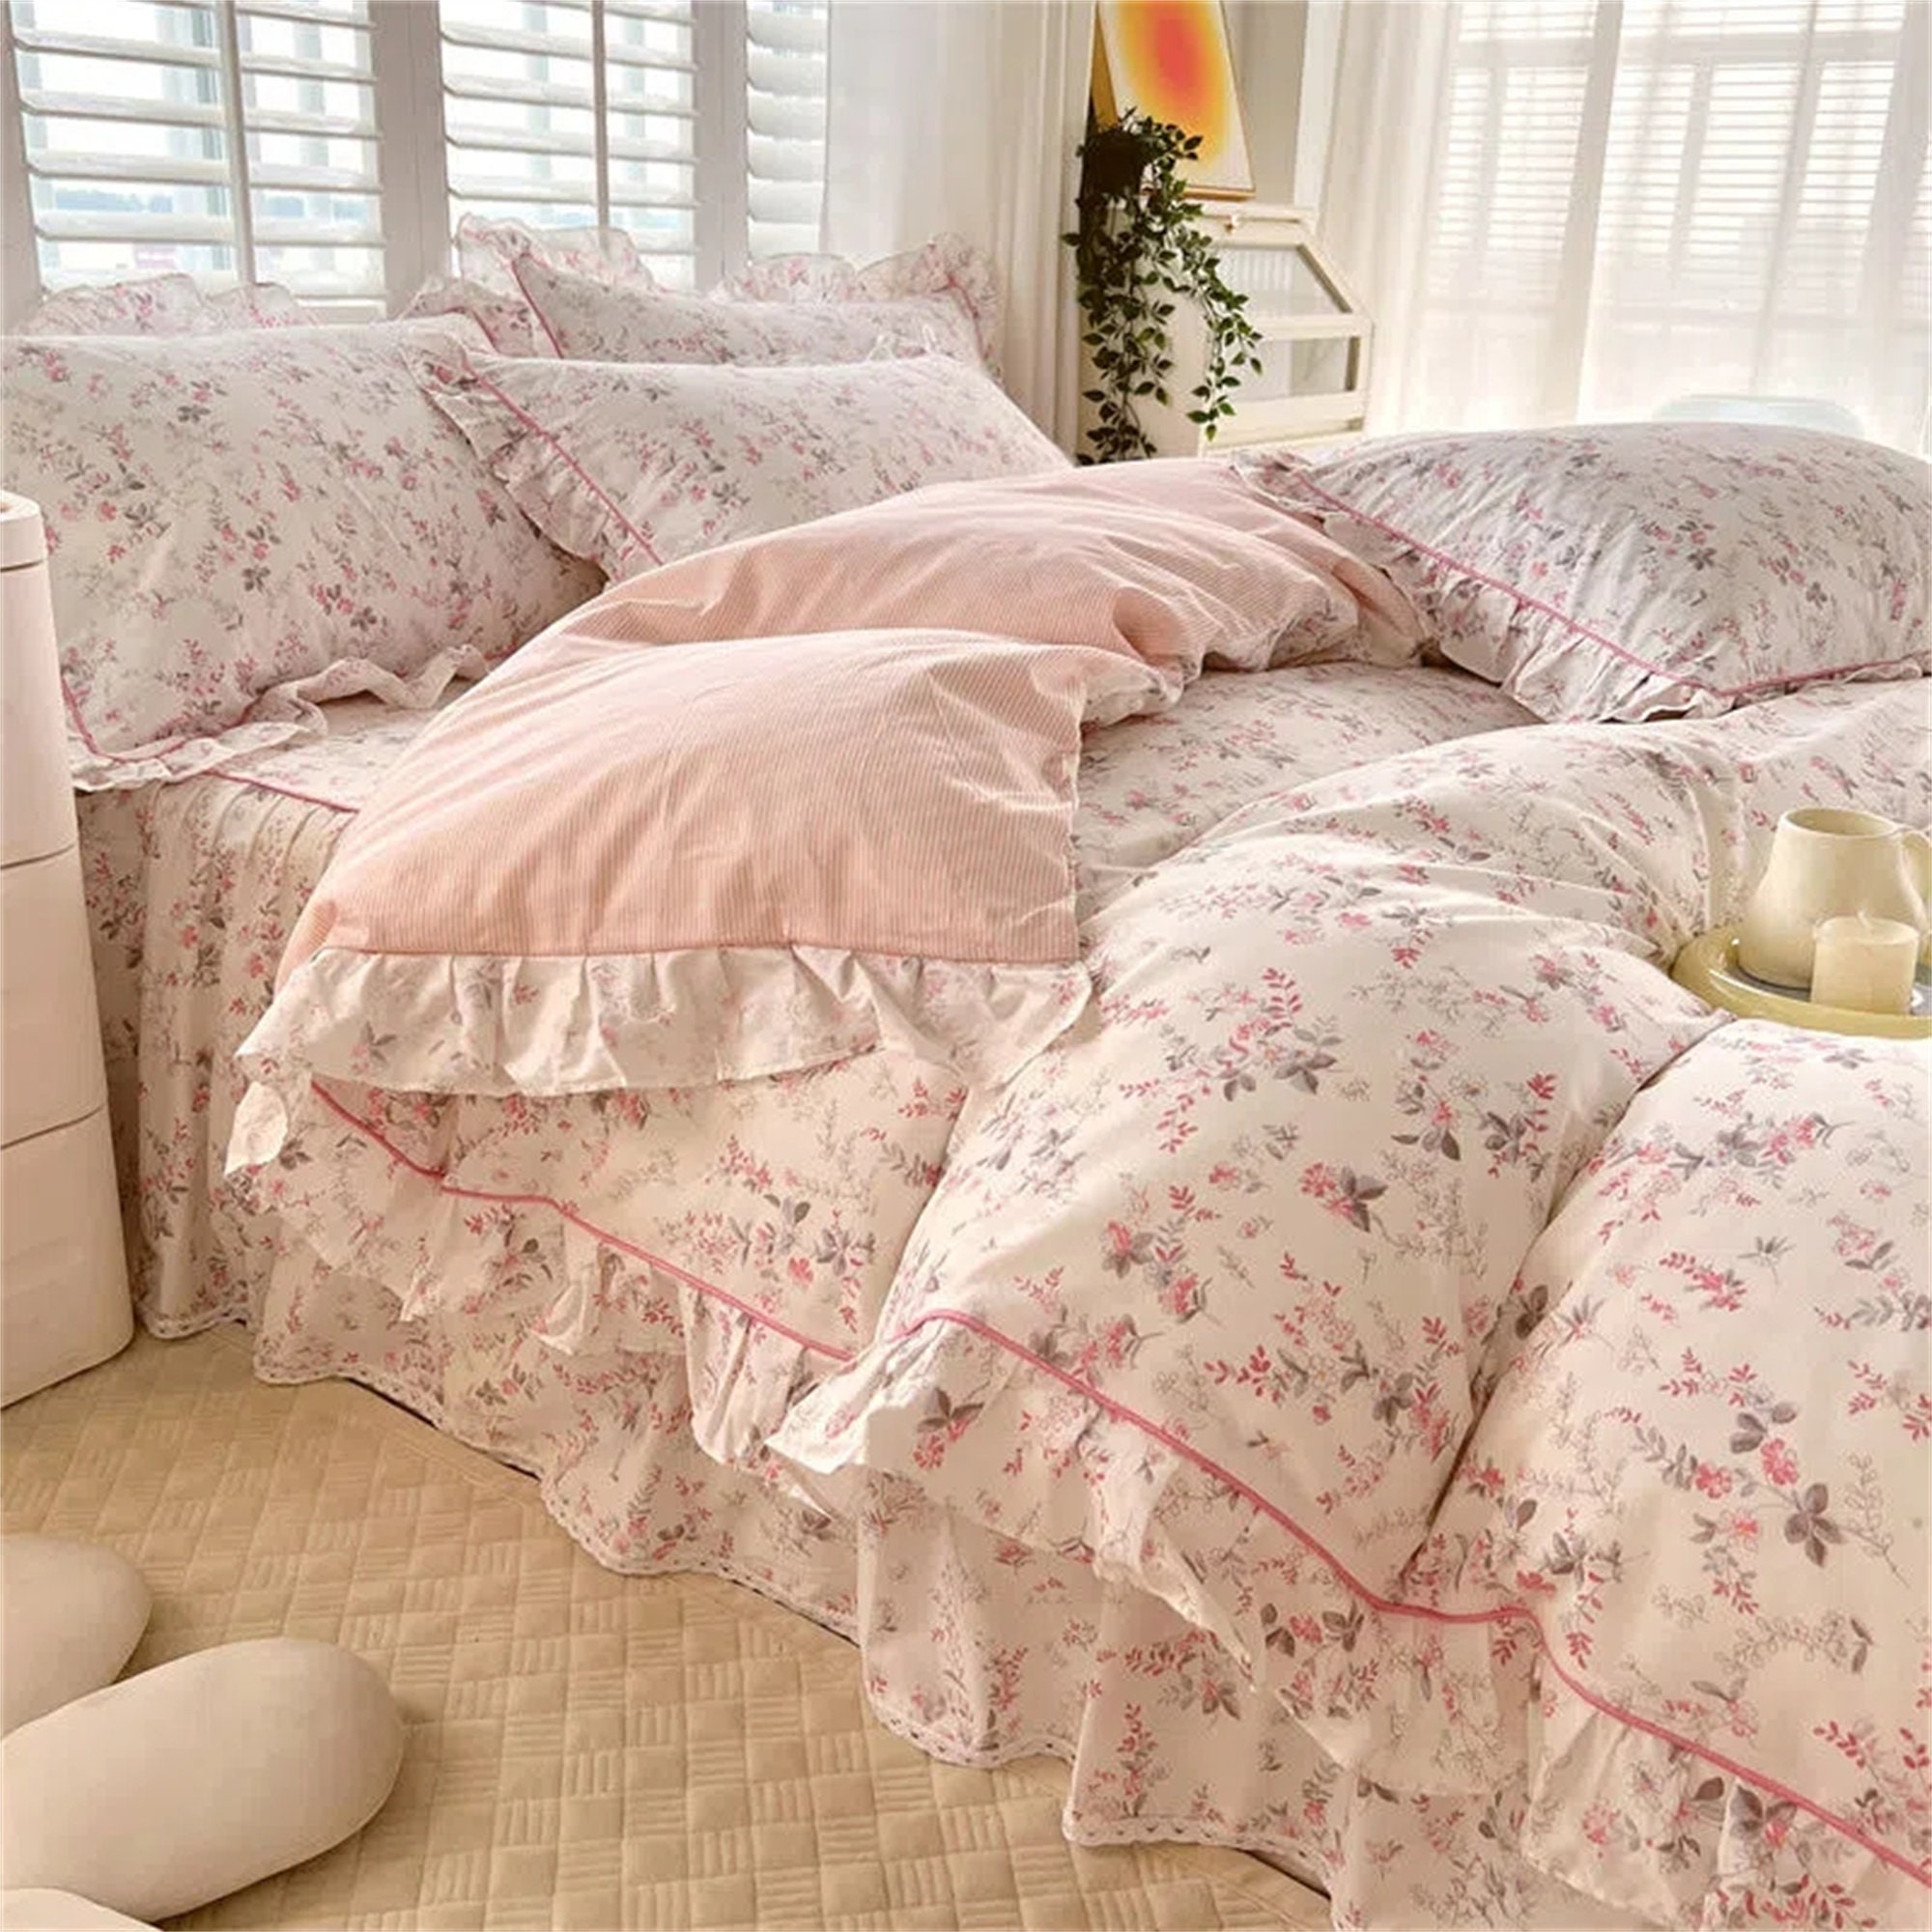 Pink Floral 100% Cotton Duvet Cover Set,french Floral Gentle Ruffle Bedding,twin  Full Queen King Duvet Cover,cottagecore Bedding,dormbedding 